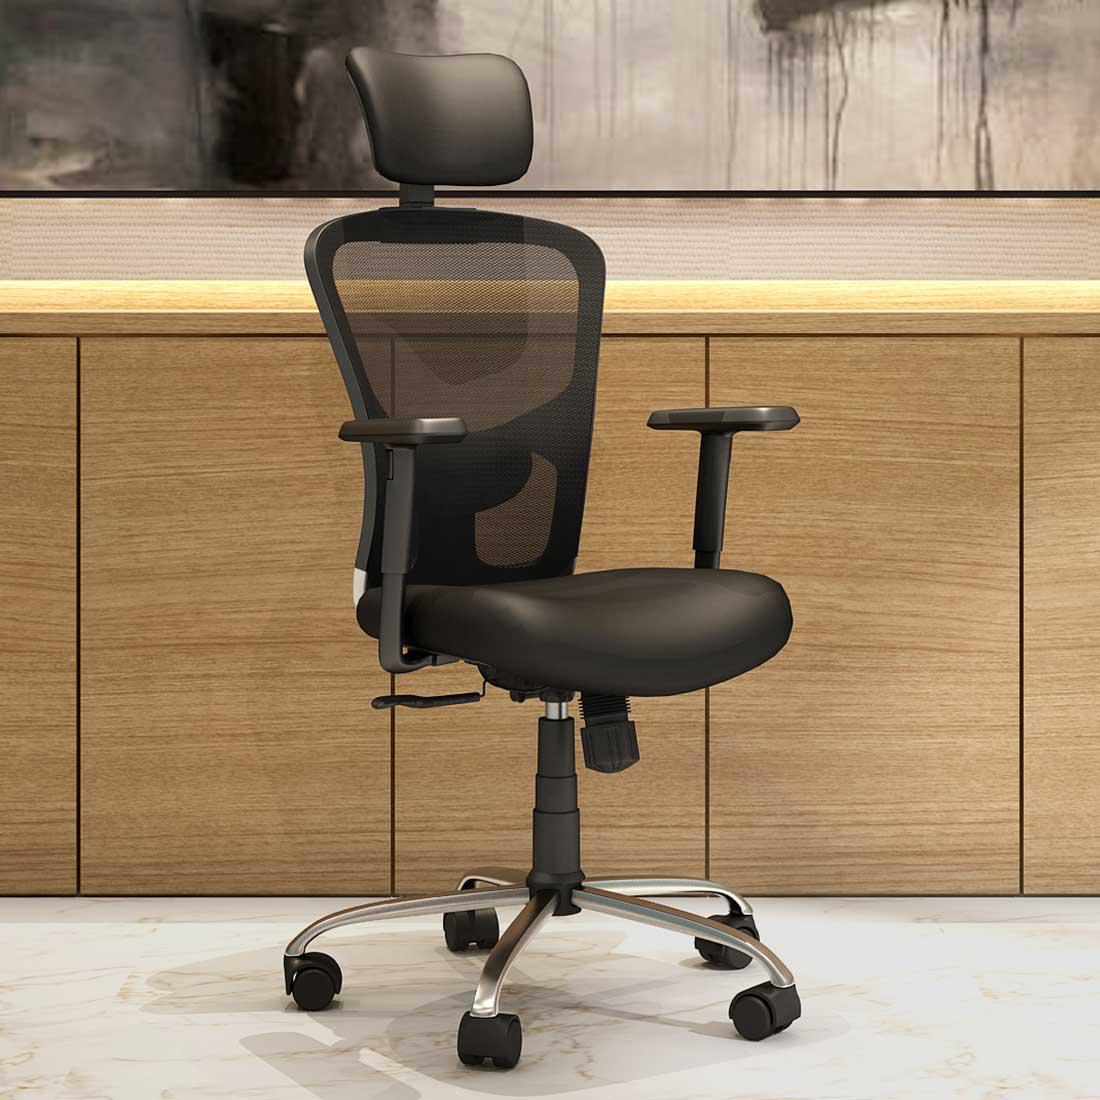 Define High Back Office chair, Buy office chairs online